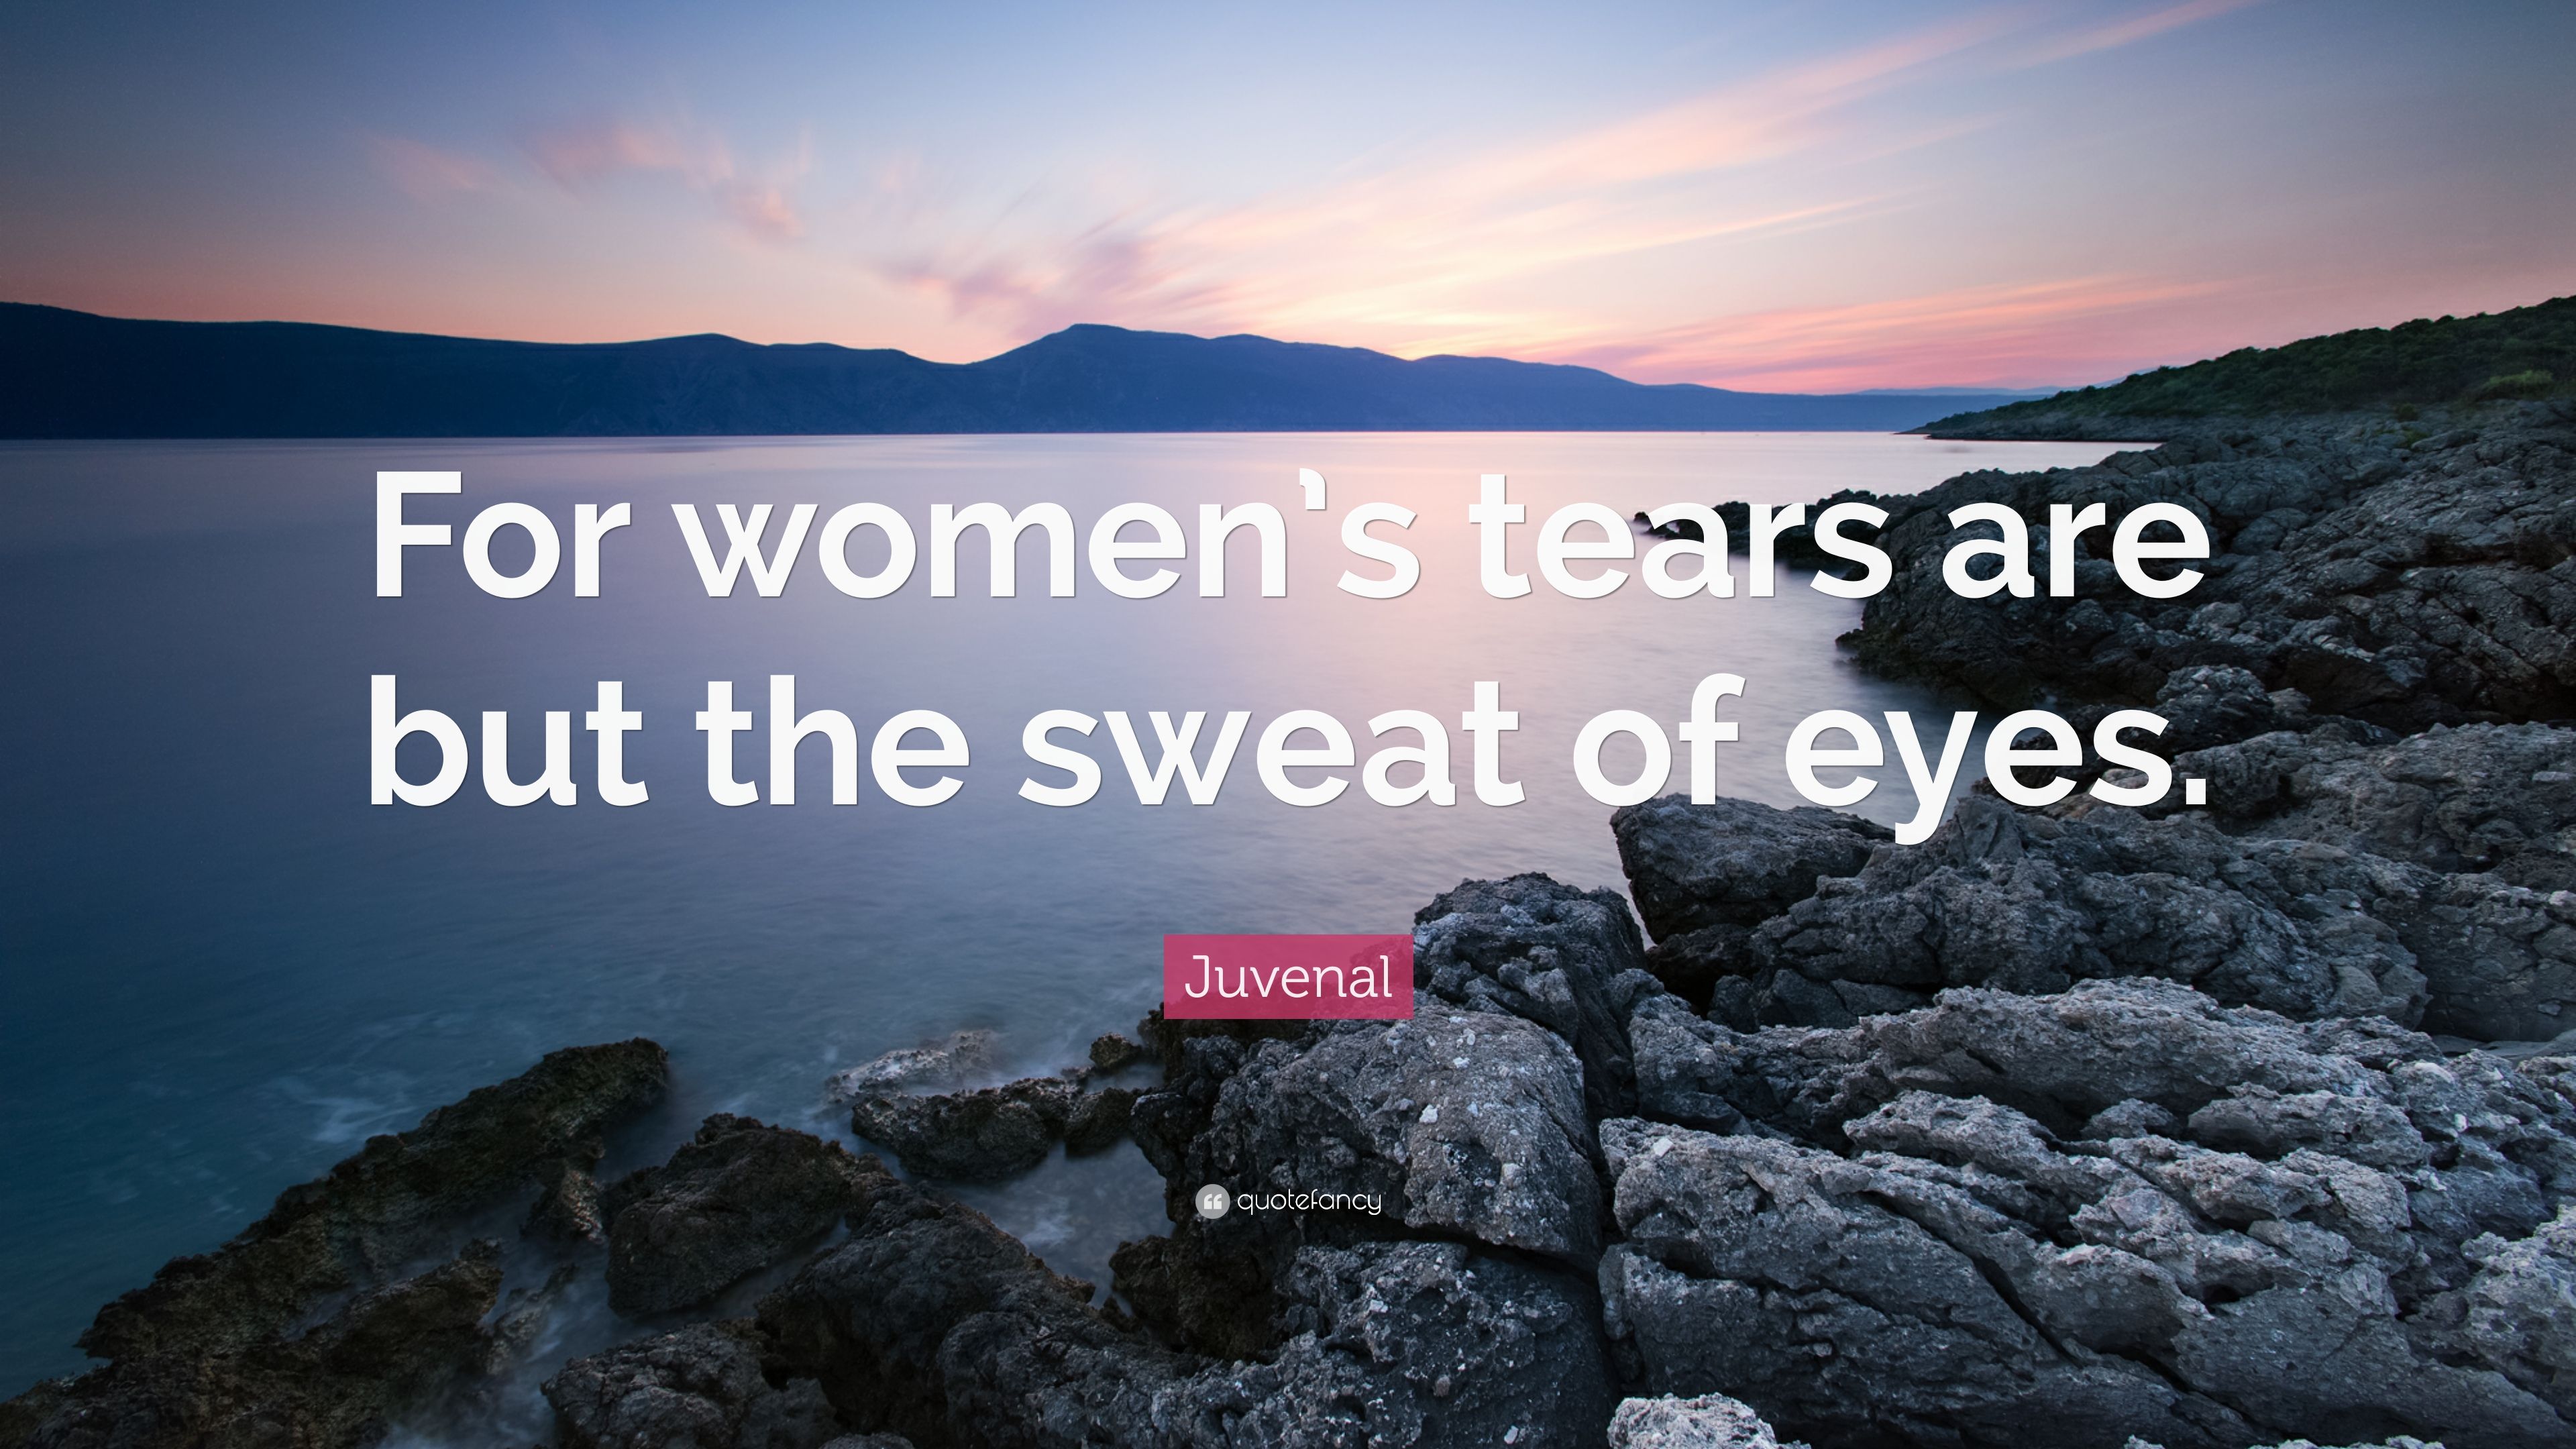 Juvenal Quote: “For women's tears are but the sweat of eyes.” 7